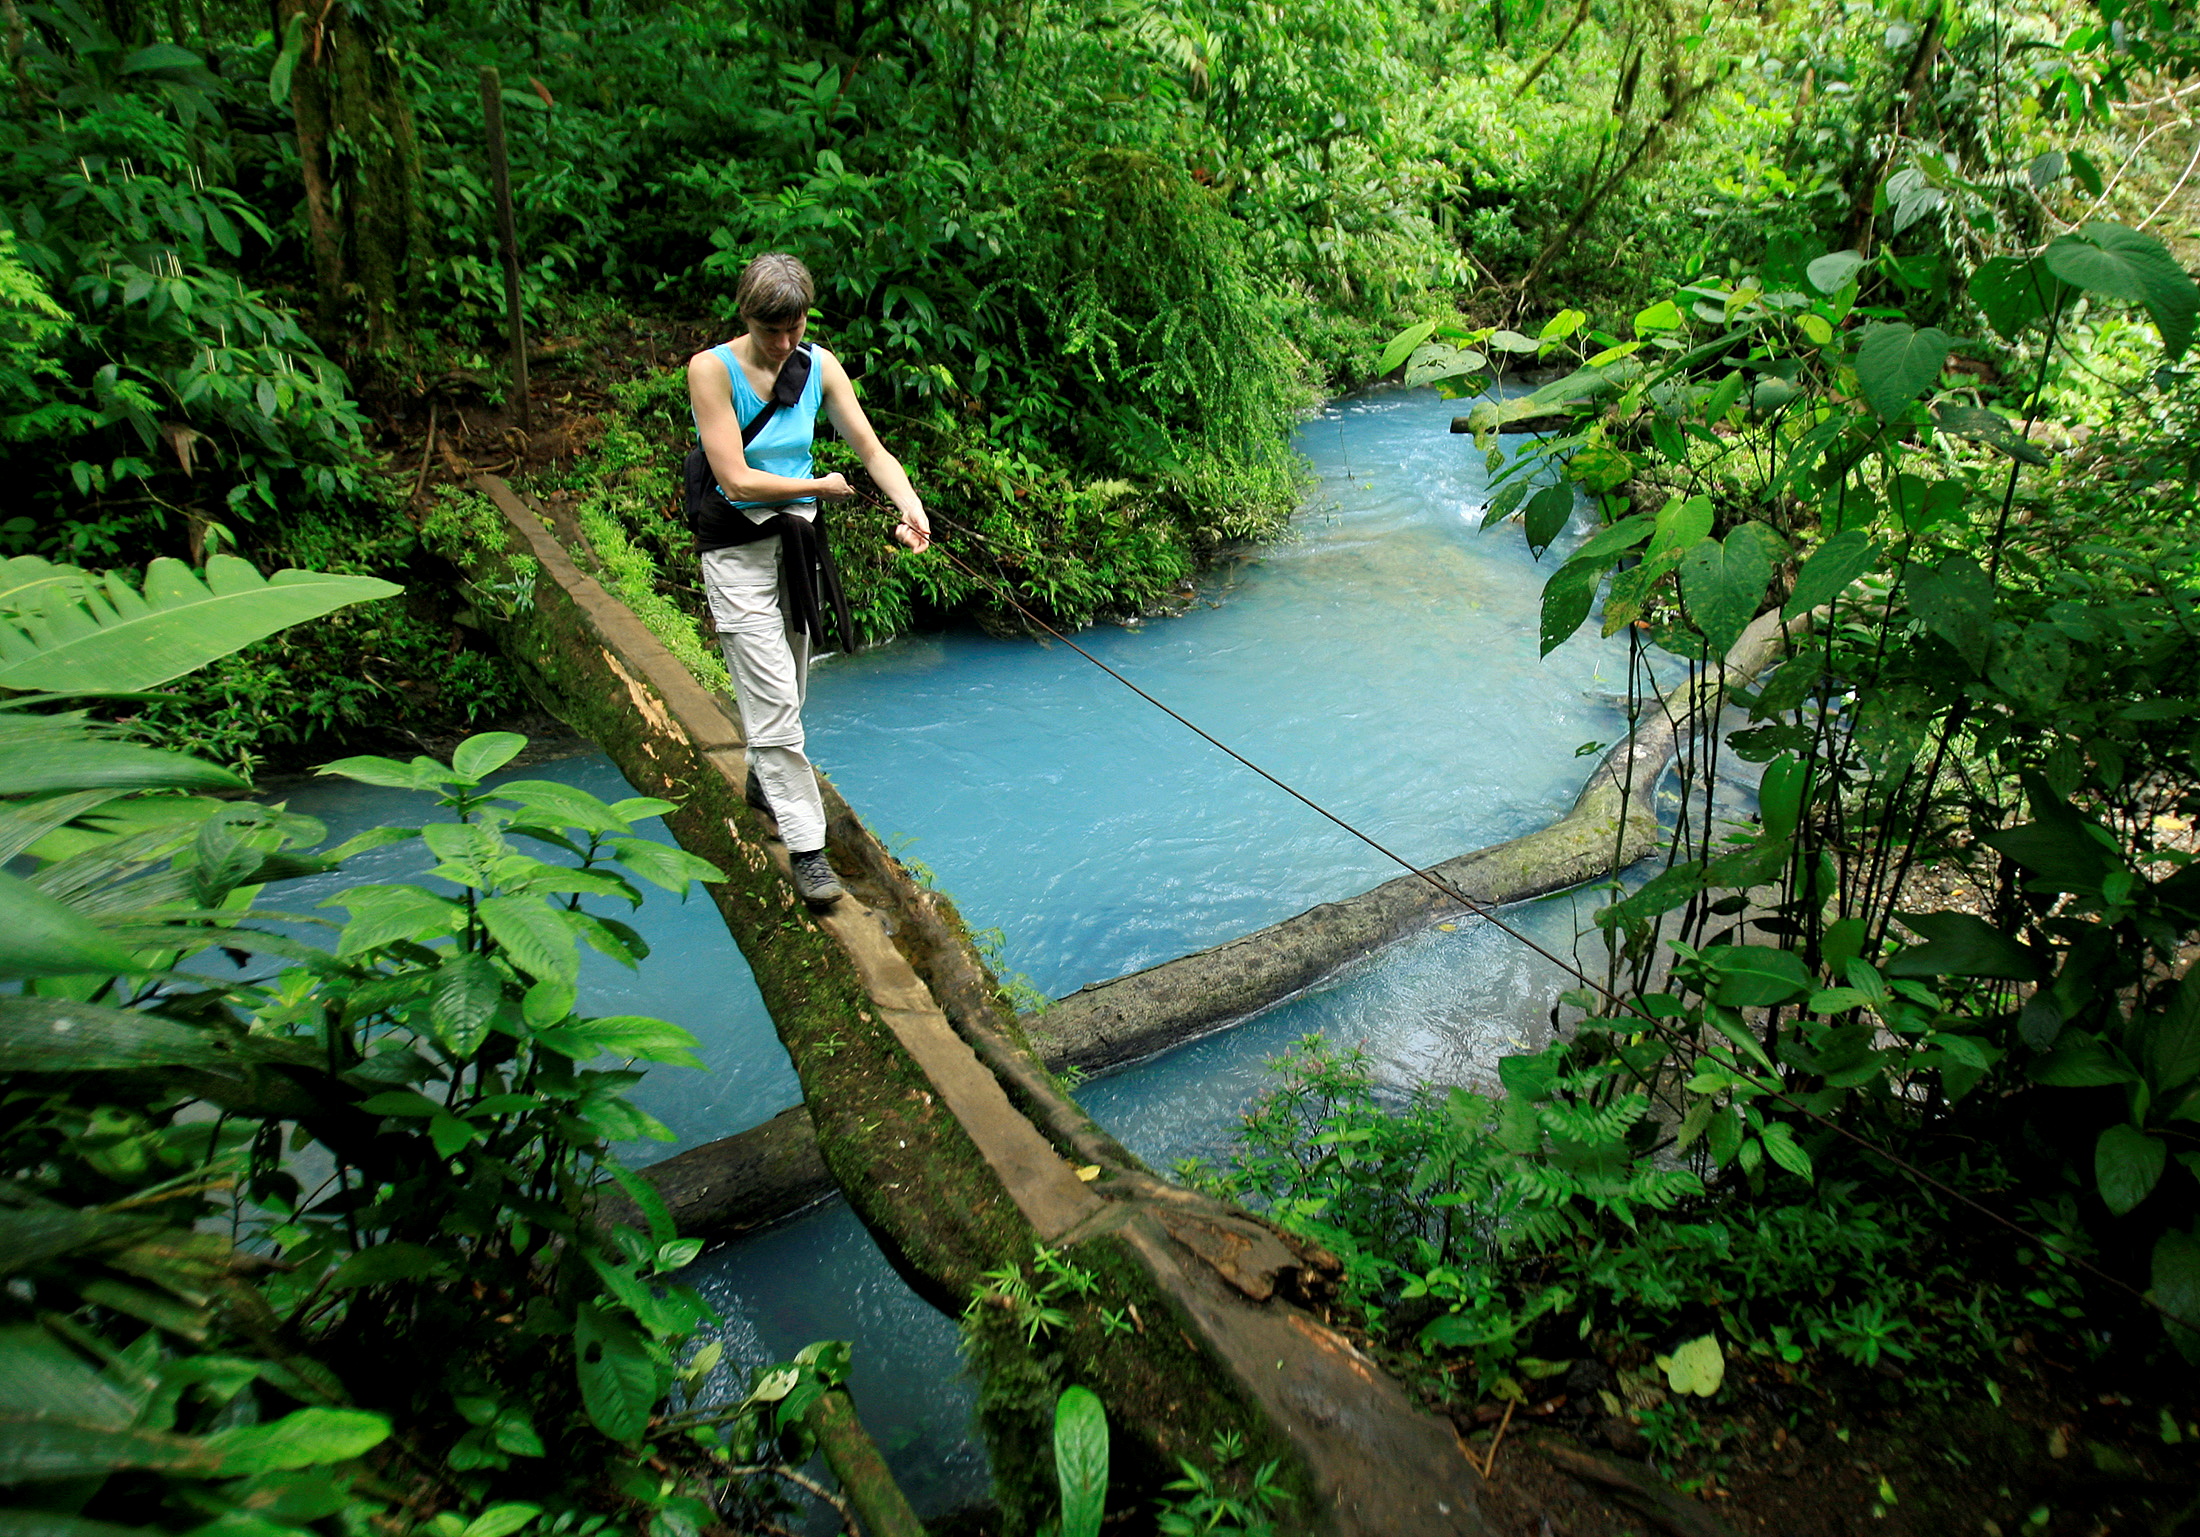 A Spanish tourist crosses a bridge over the Celeste river at Tenorio Volcano National Park in Upala March 18, 2008. The blue color of the lagoon, formed from chemical reactions of calcium carbonate and sulfur, is surrounded by an amazing rainforest that constitutes 12,819 hectares of this park. REUTERS/Juan Carlos Ulate (COSTA RICA)